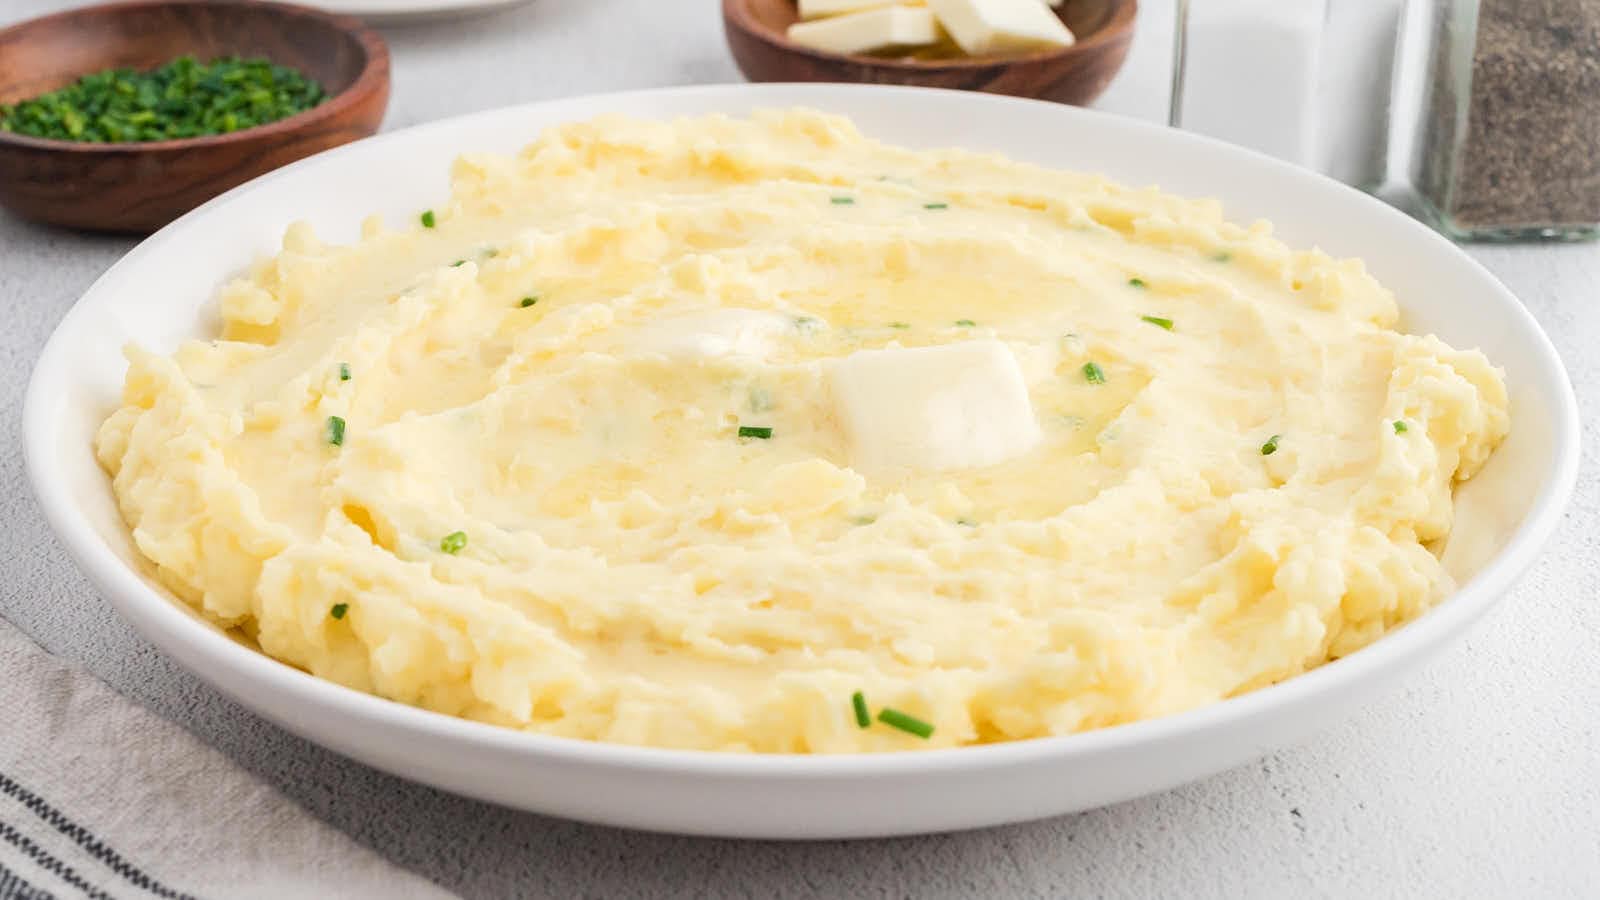 Sour Cream Mashed Potatoes recipe by Cheerful Cook.